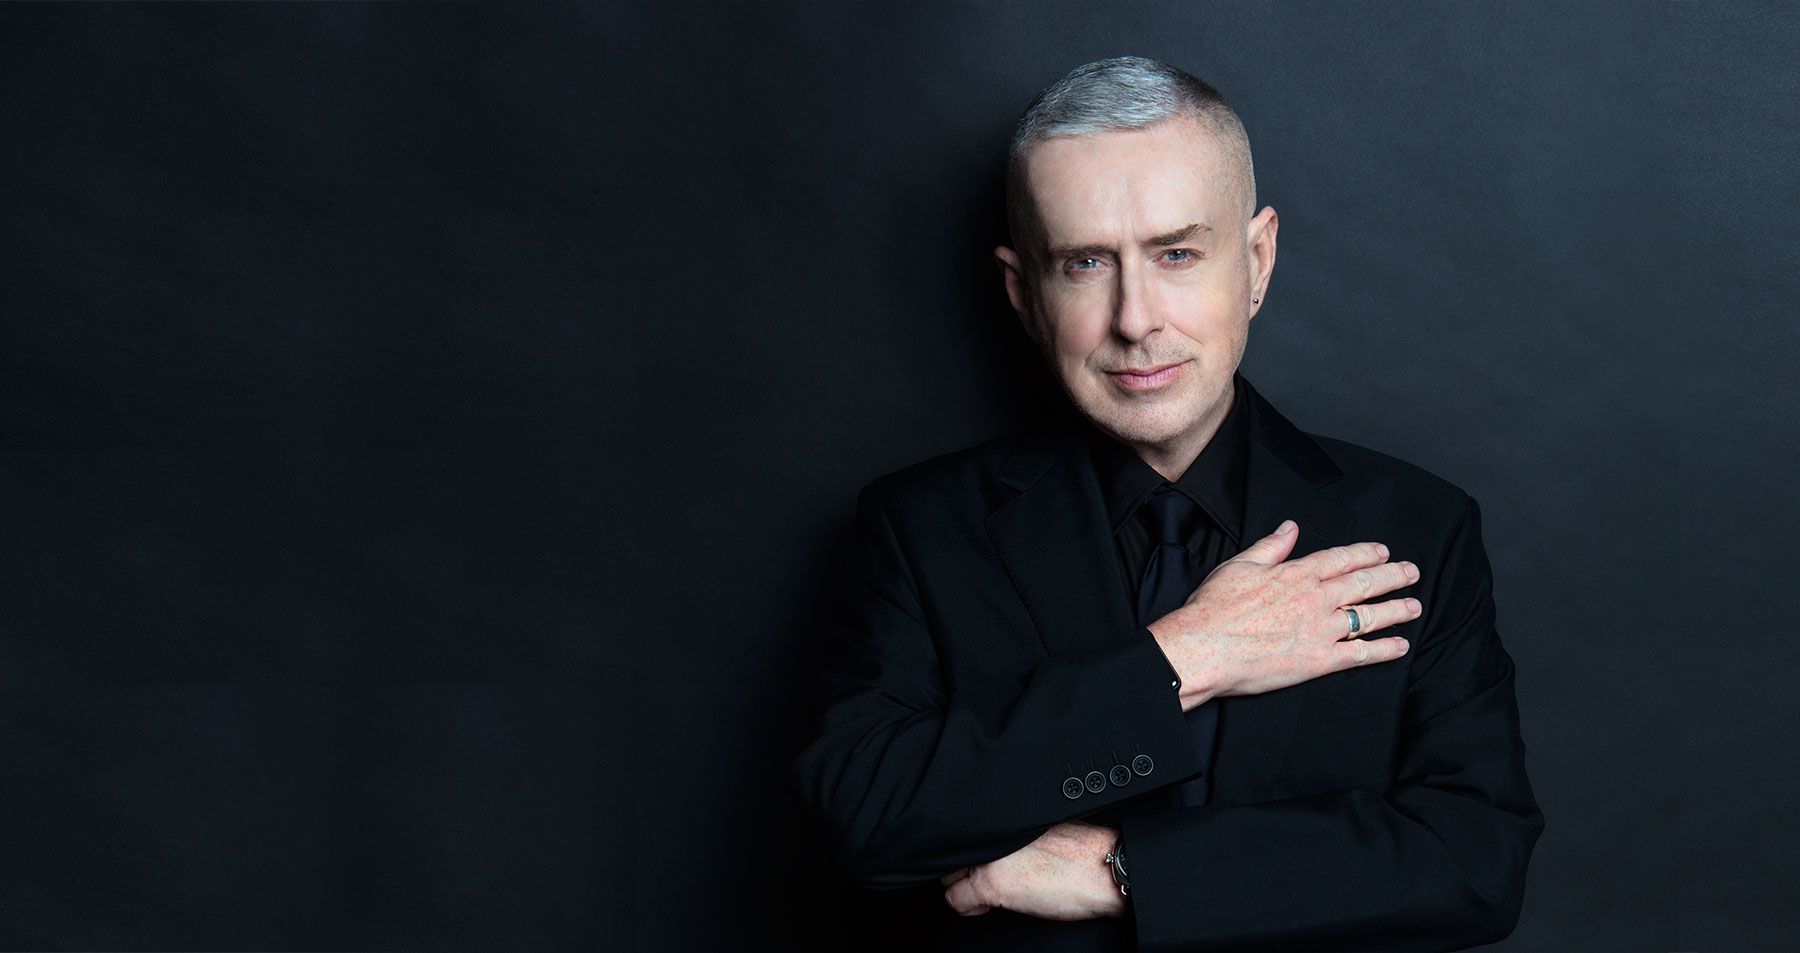 ‘Ascension’ the new single from Holly Johnson